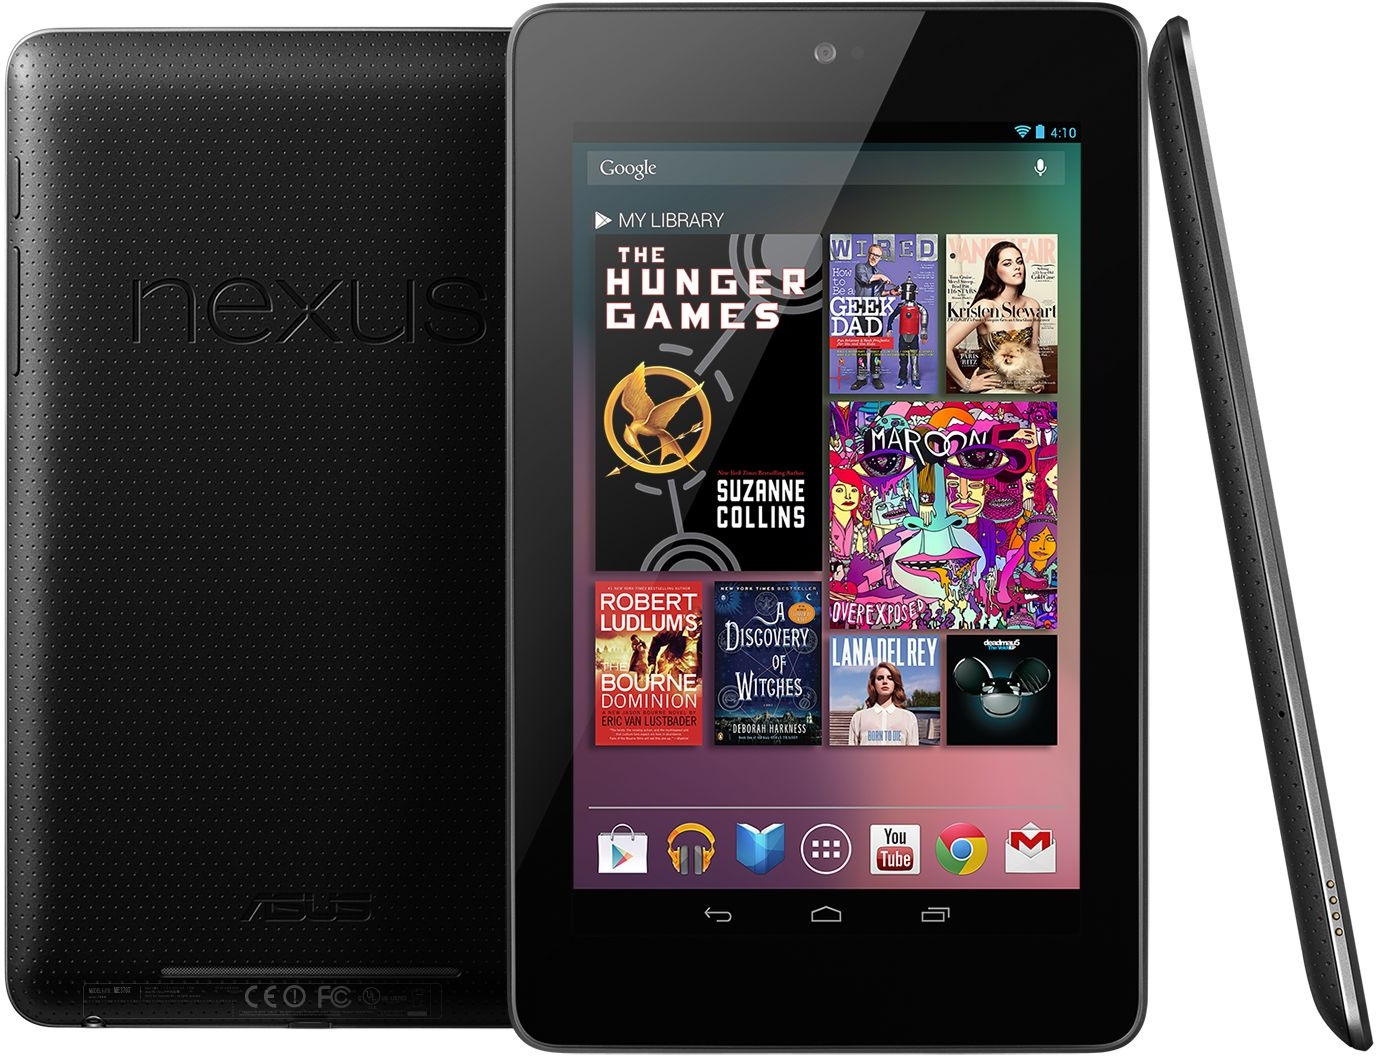 Asus Nexus 7 3G 7″ Android Tablet « Electronicinfo24.com